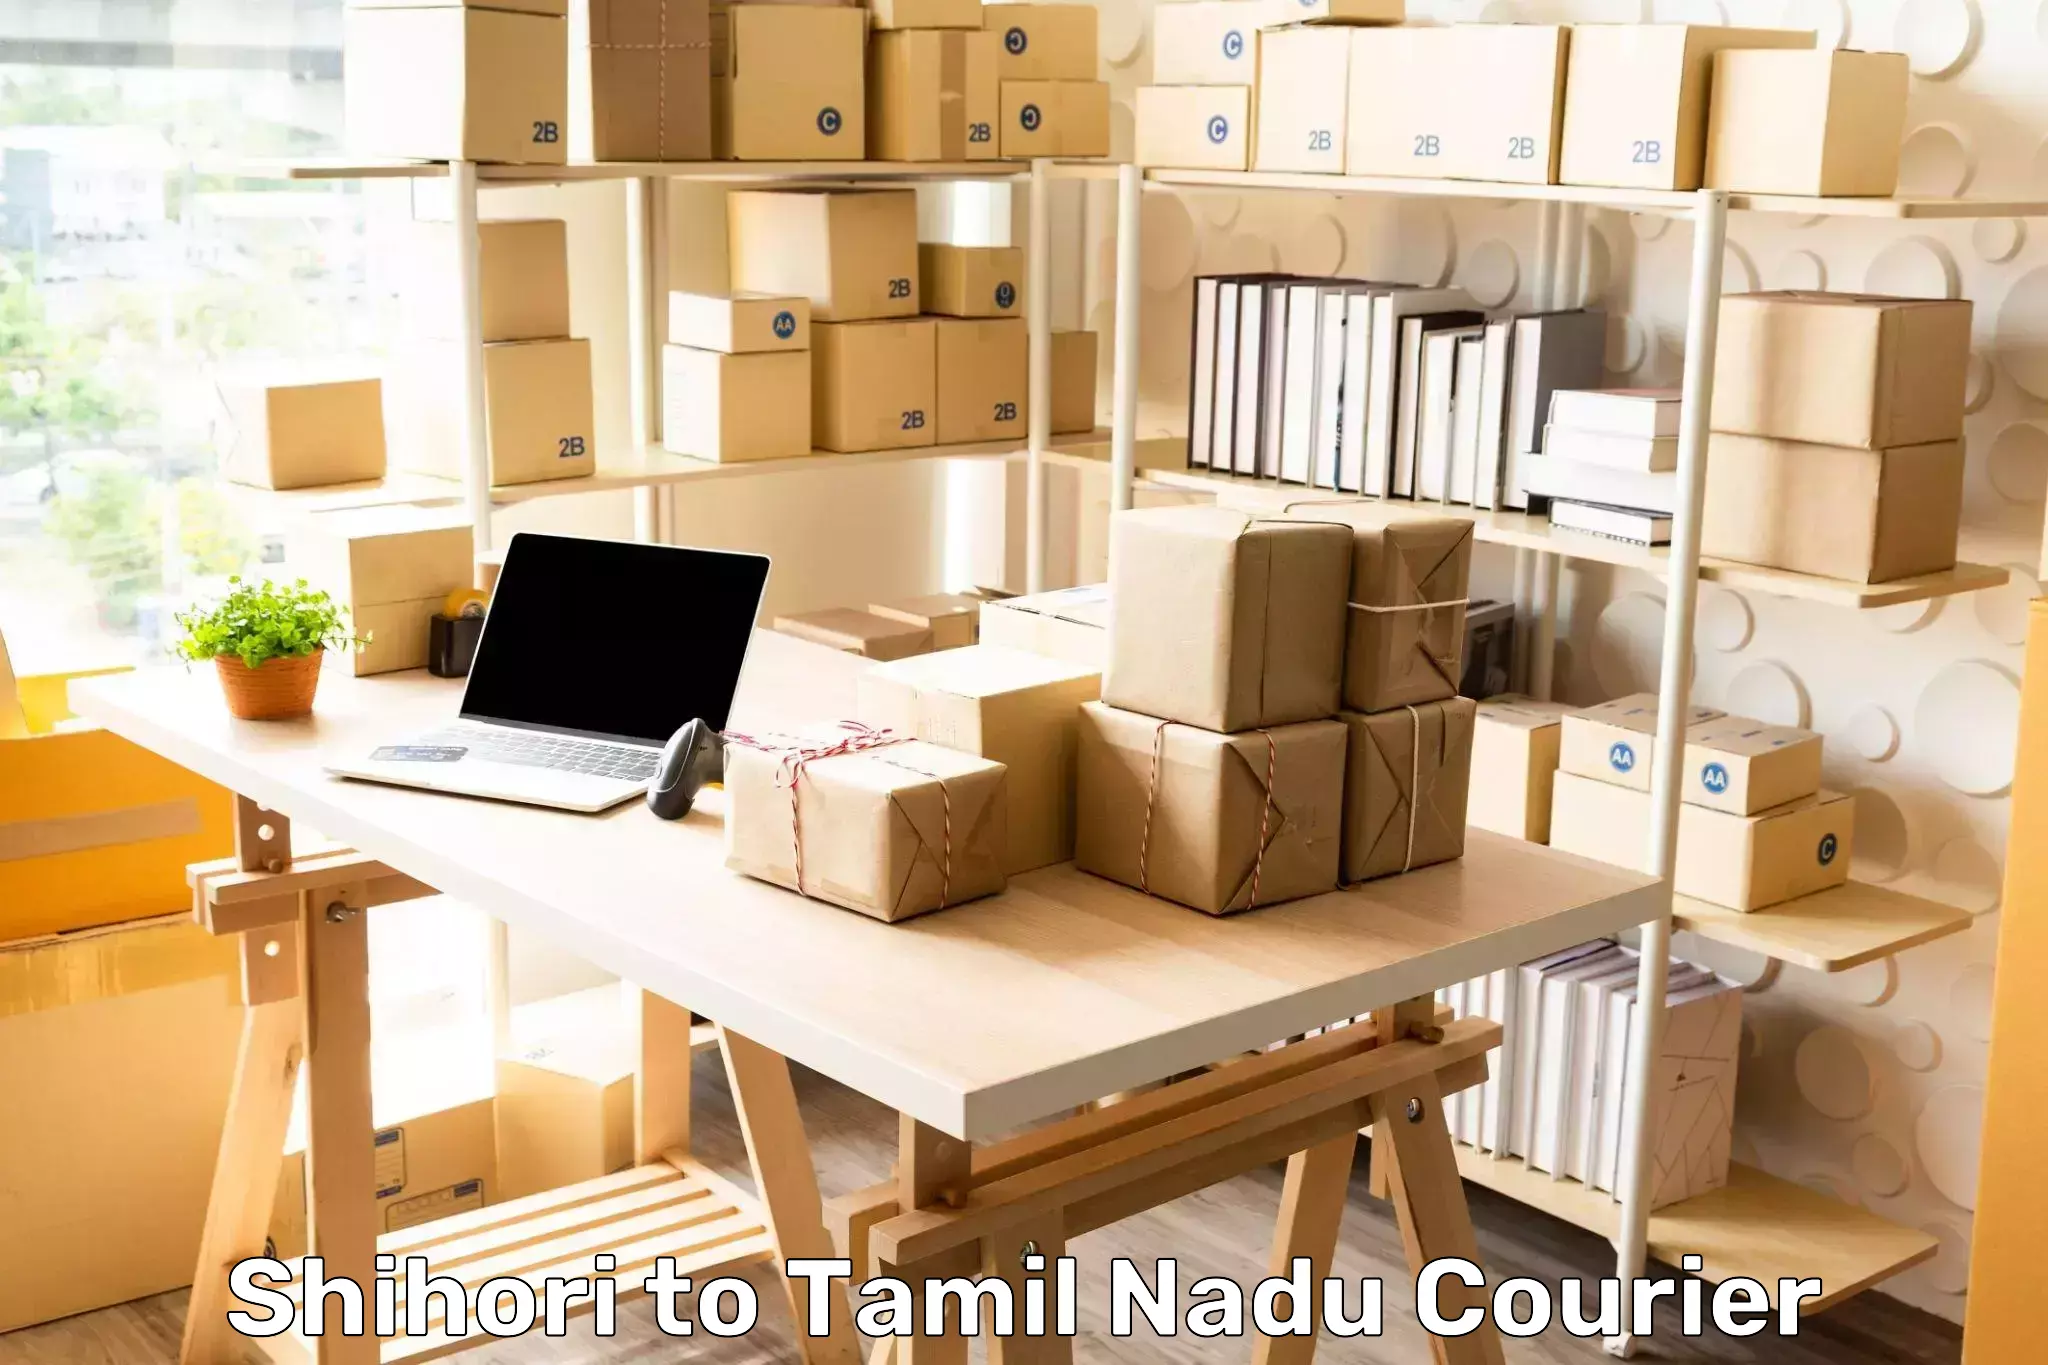 Package consolidation Shihori to Tamil Nadu